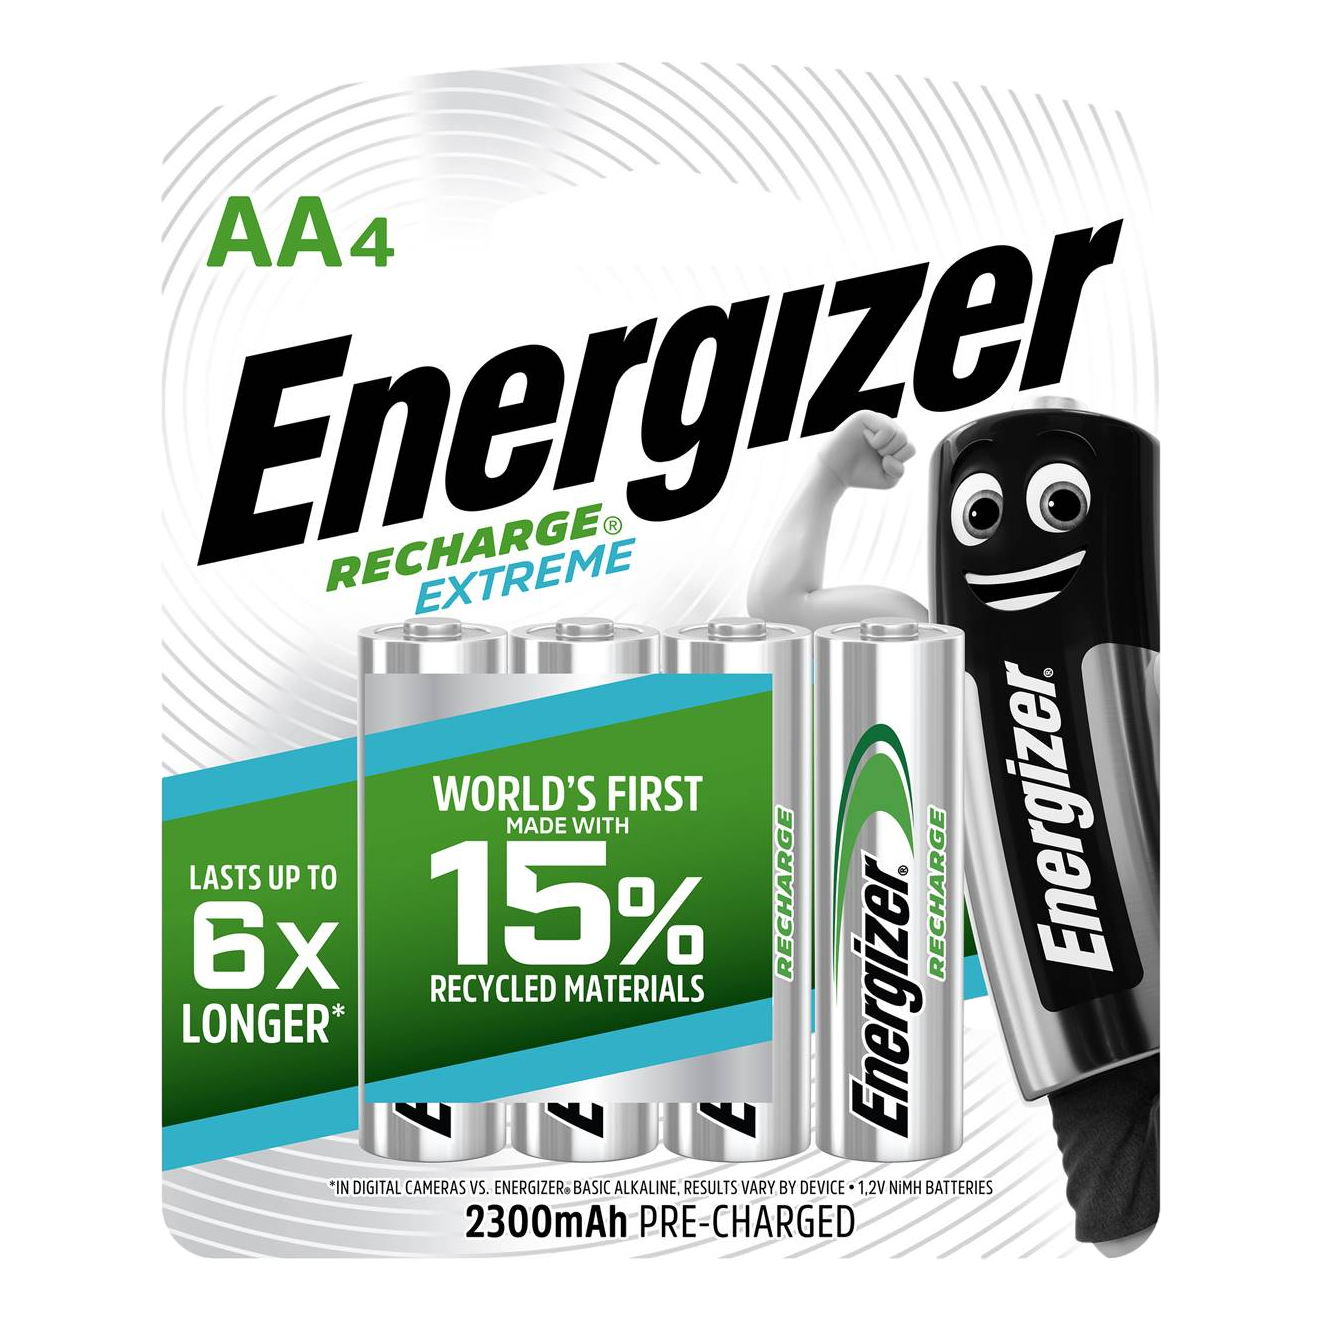 Energizer Rechargeable Battery Extreme AA 2300mAh NiMH 4 Pack